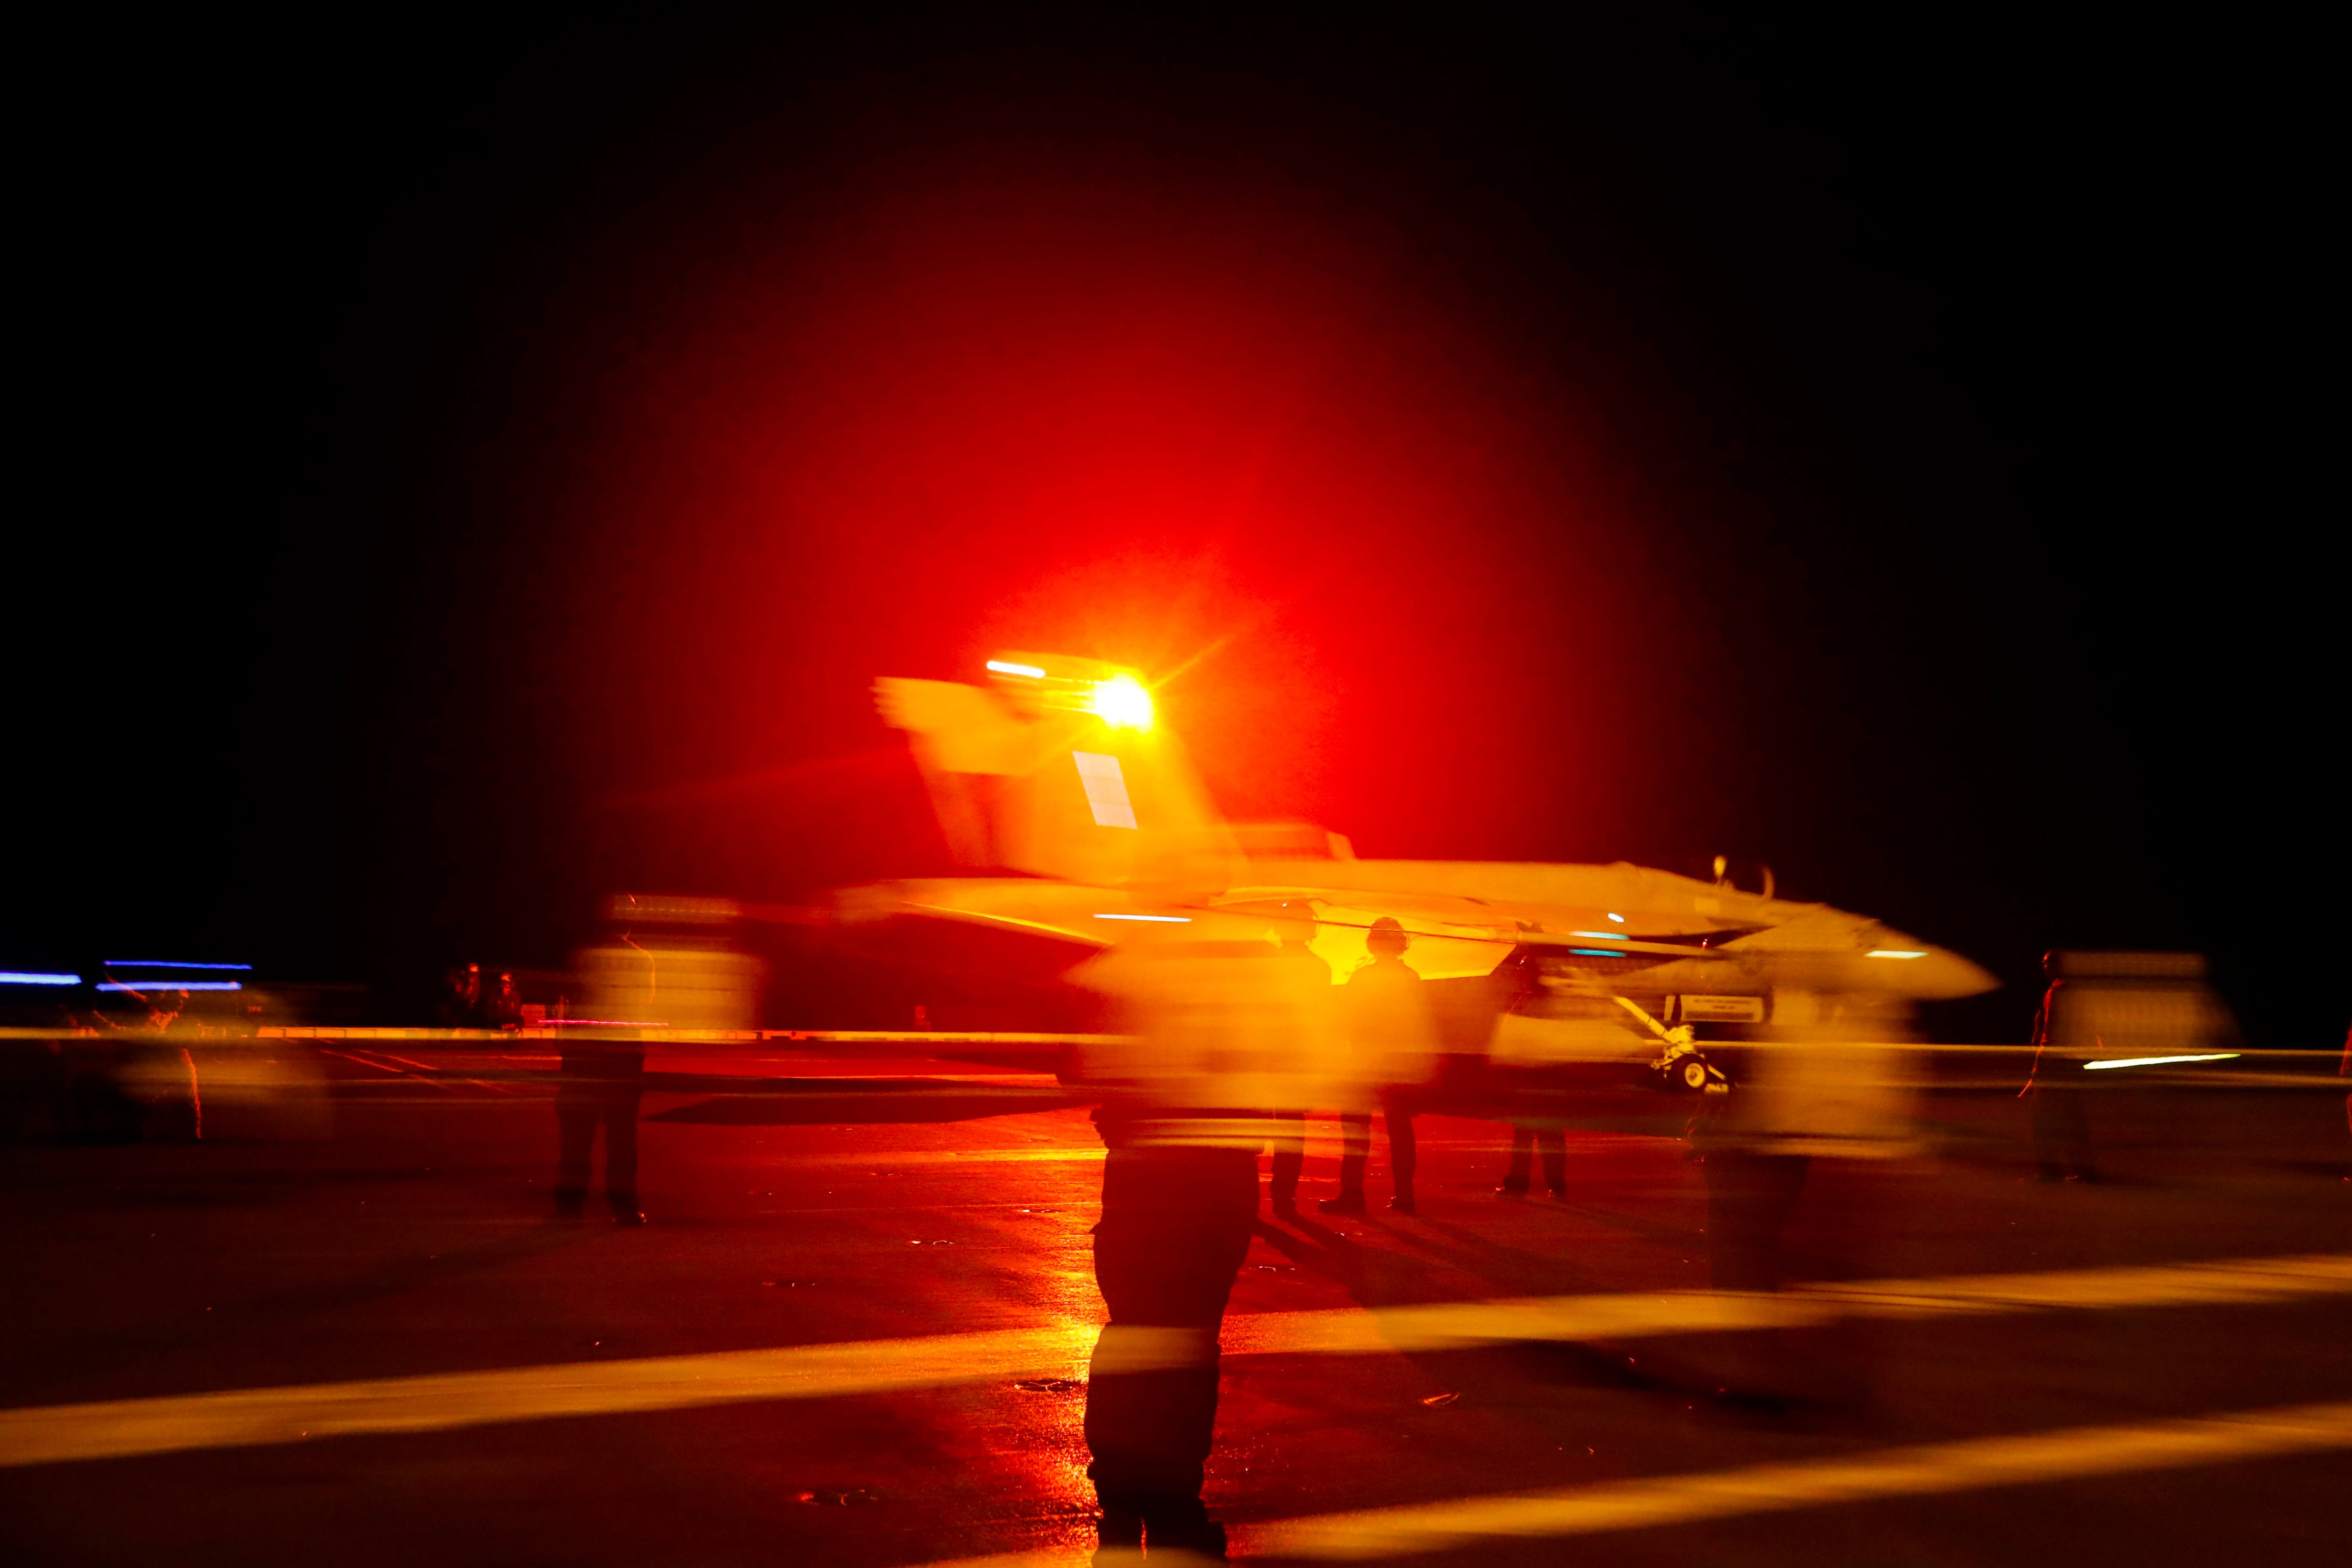 An F/A-18E Super Hornet aircraft launches from the flight deck the Nimitz-class aircraft carrier USS Abraham Lincoln in the Persian Gulf on May 10, 2019. The  aircraft carrier strike group is being deployed to the Persian Gulf to counter an alleged but still-unspecified threat from Iran. (Mass Communication Specialist Seaman Michael Singley—AP)